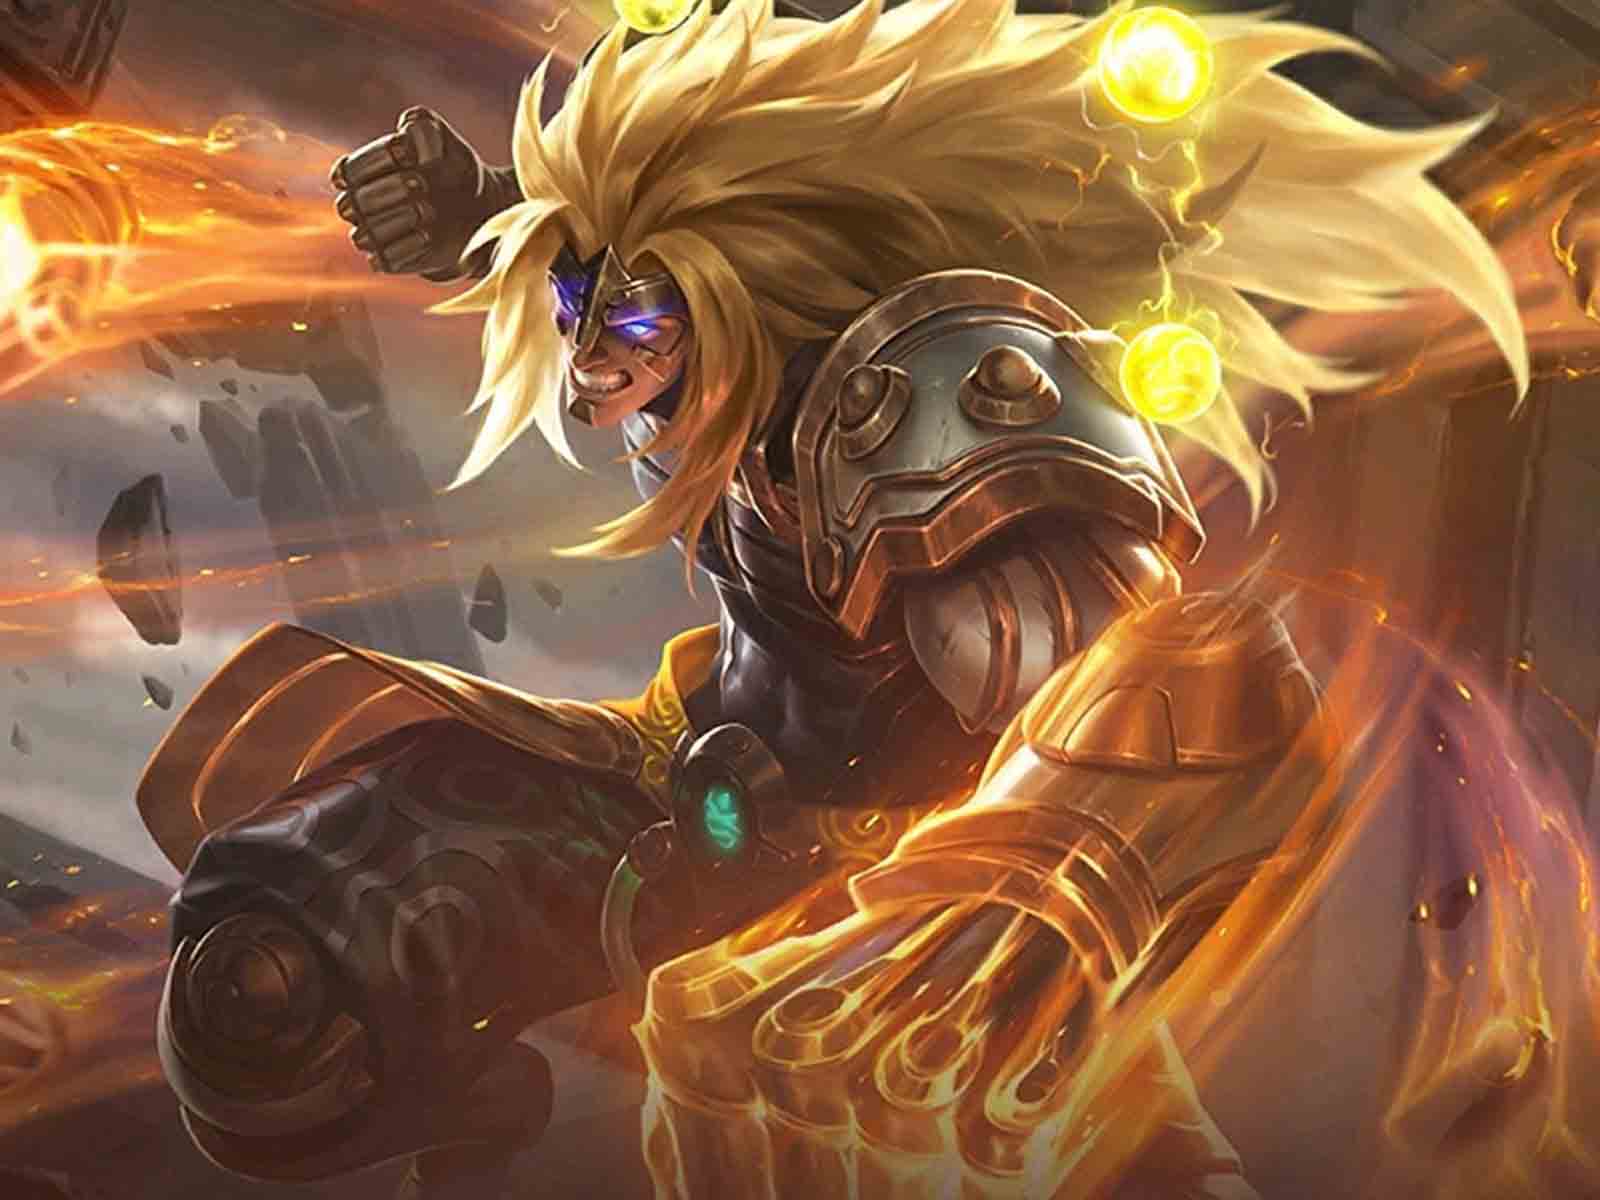 49++ 9 types of skins in mobile legends ml ideas in 2021 